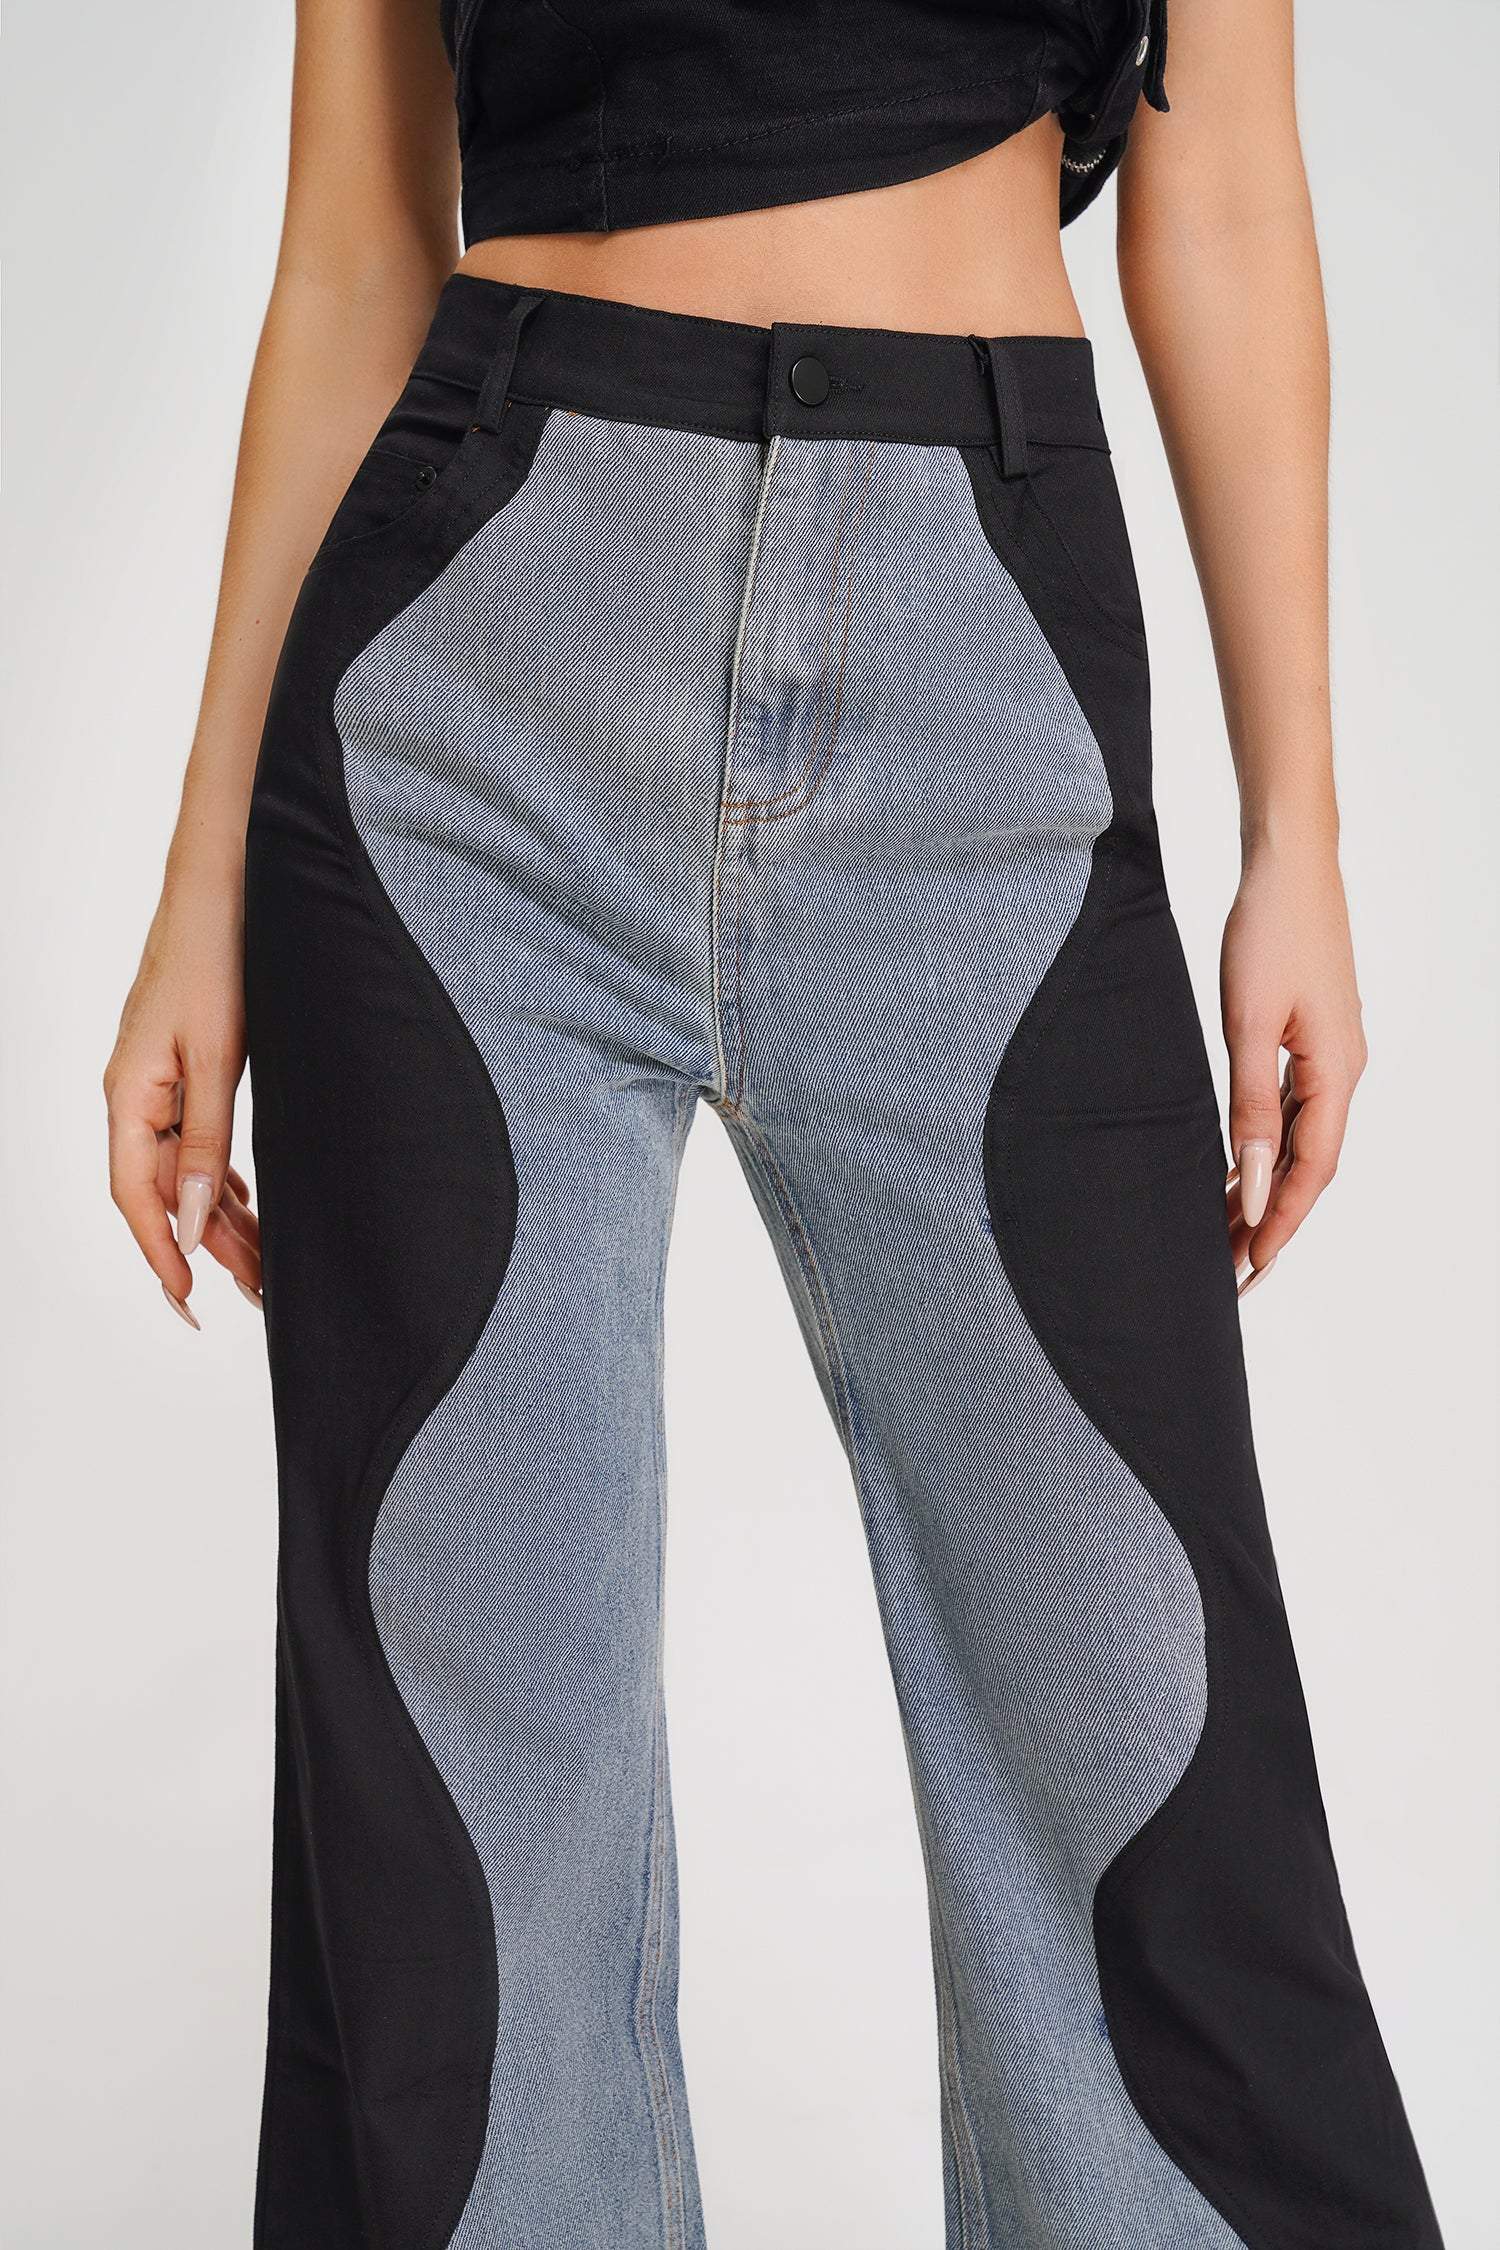 Maryline Wave Spliced Jeans